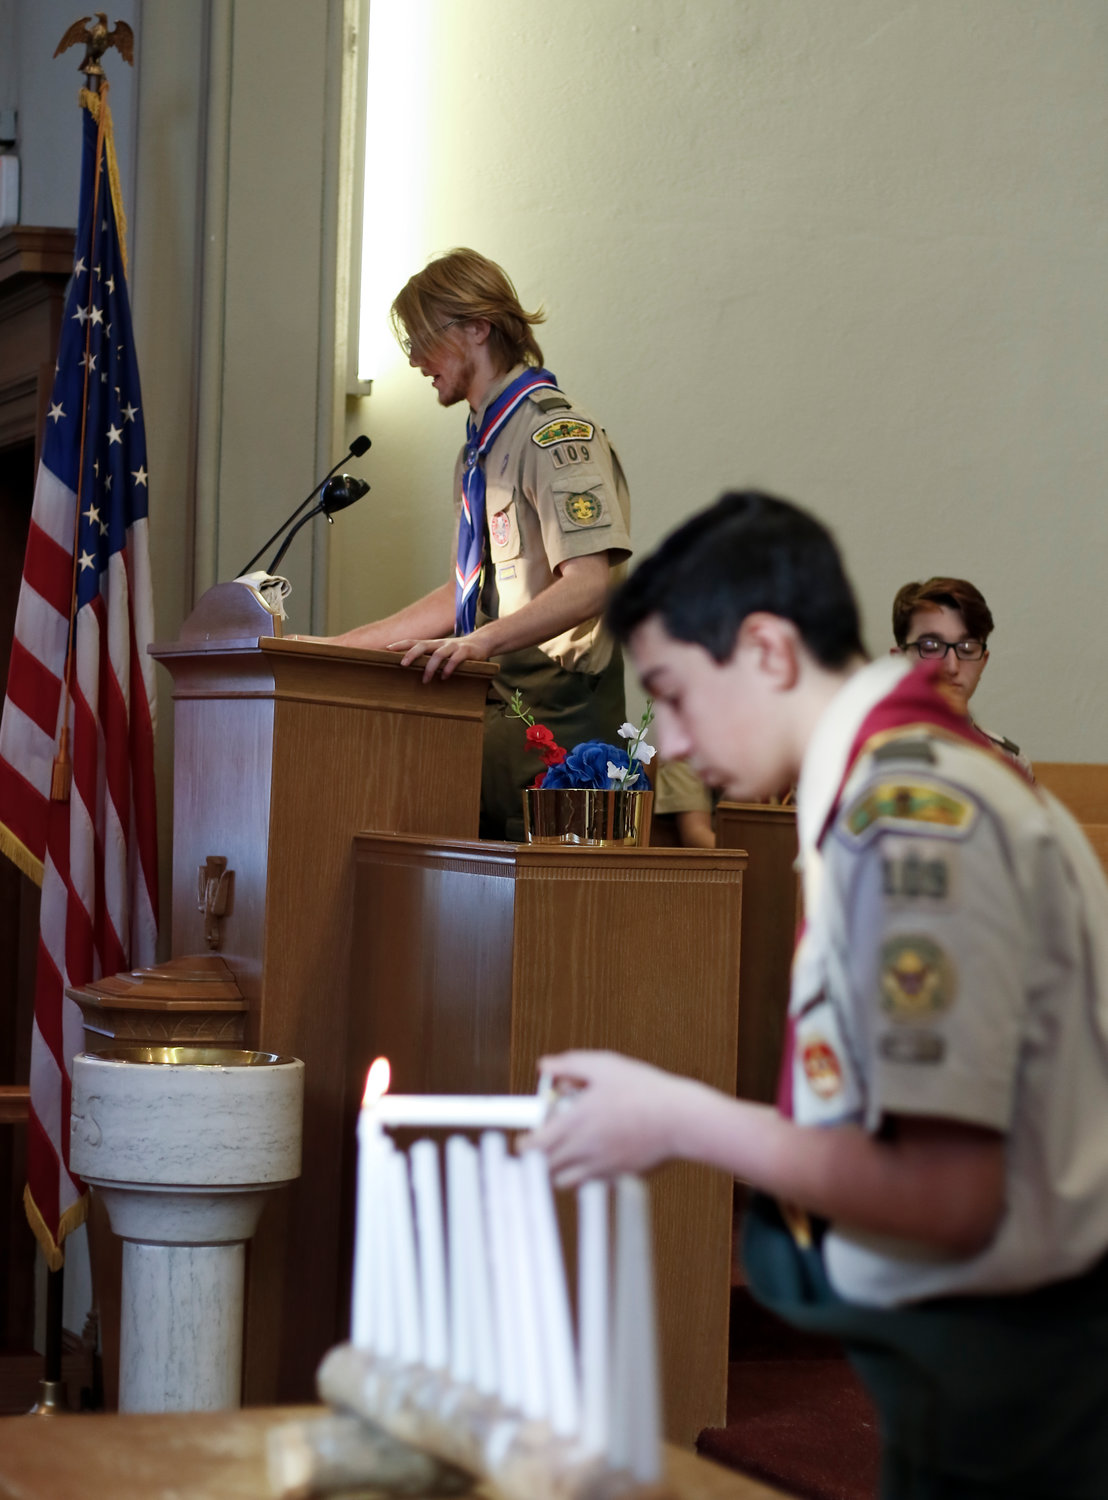 Valley Stream's Boy Scout Troop 109 honors four new Eagle Scouts